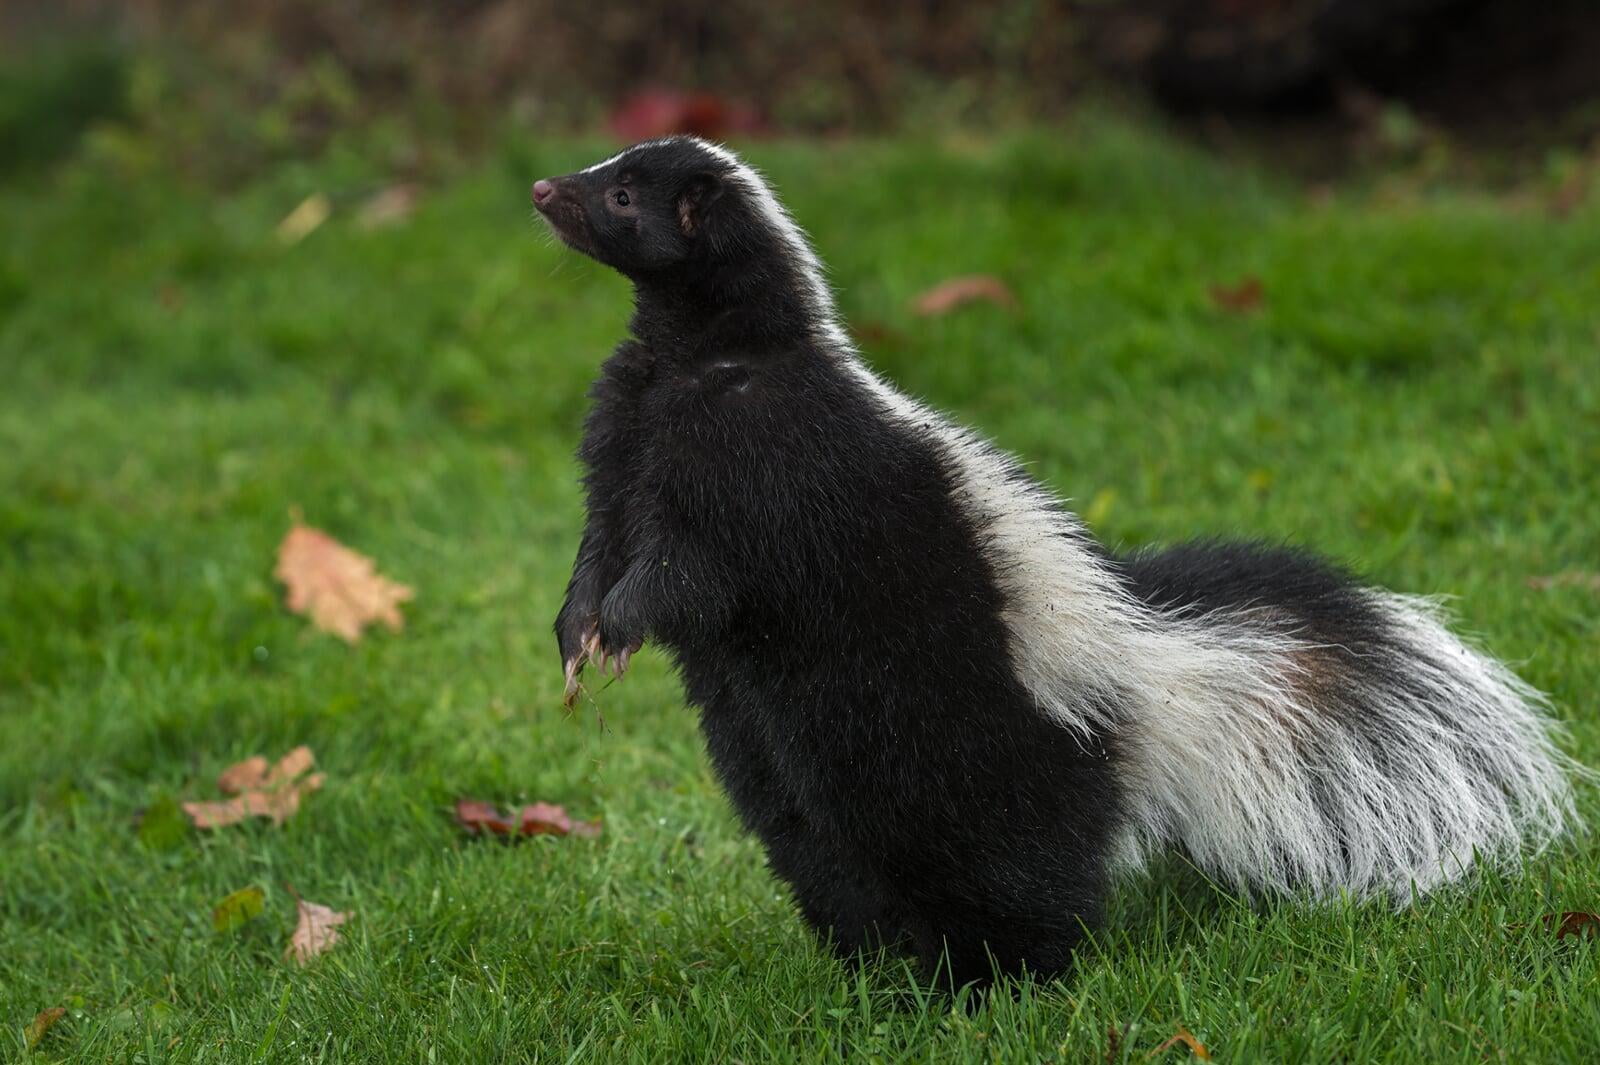 DNR Director Makes Skunks, Squirrels Nuisance Animals In Face Of Protest